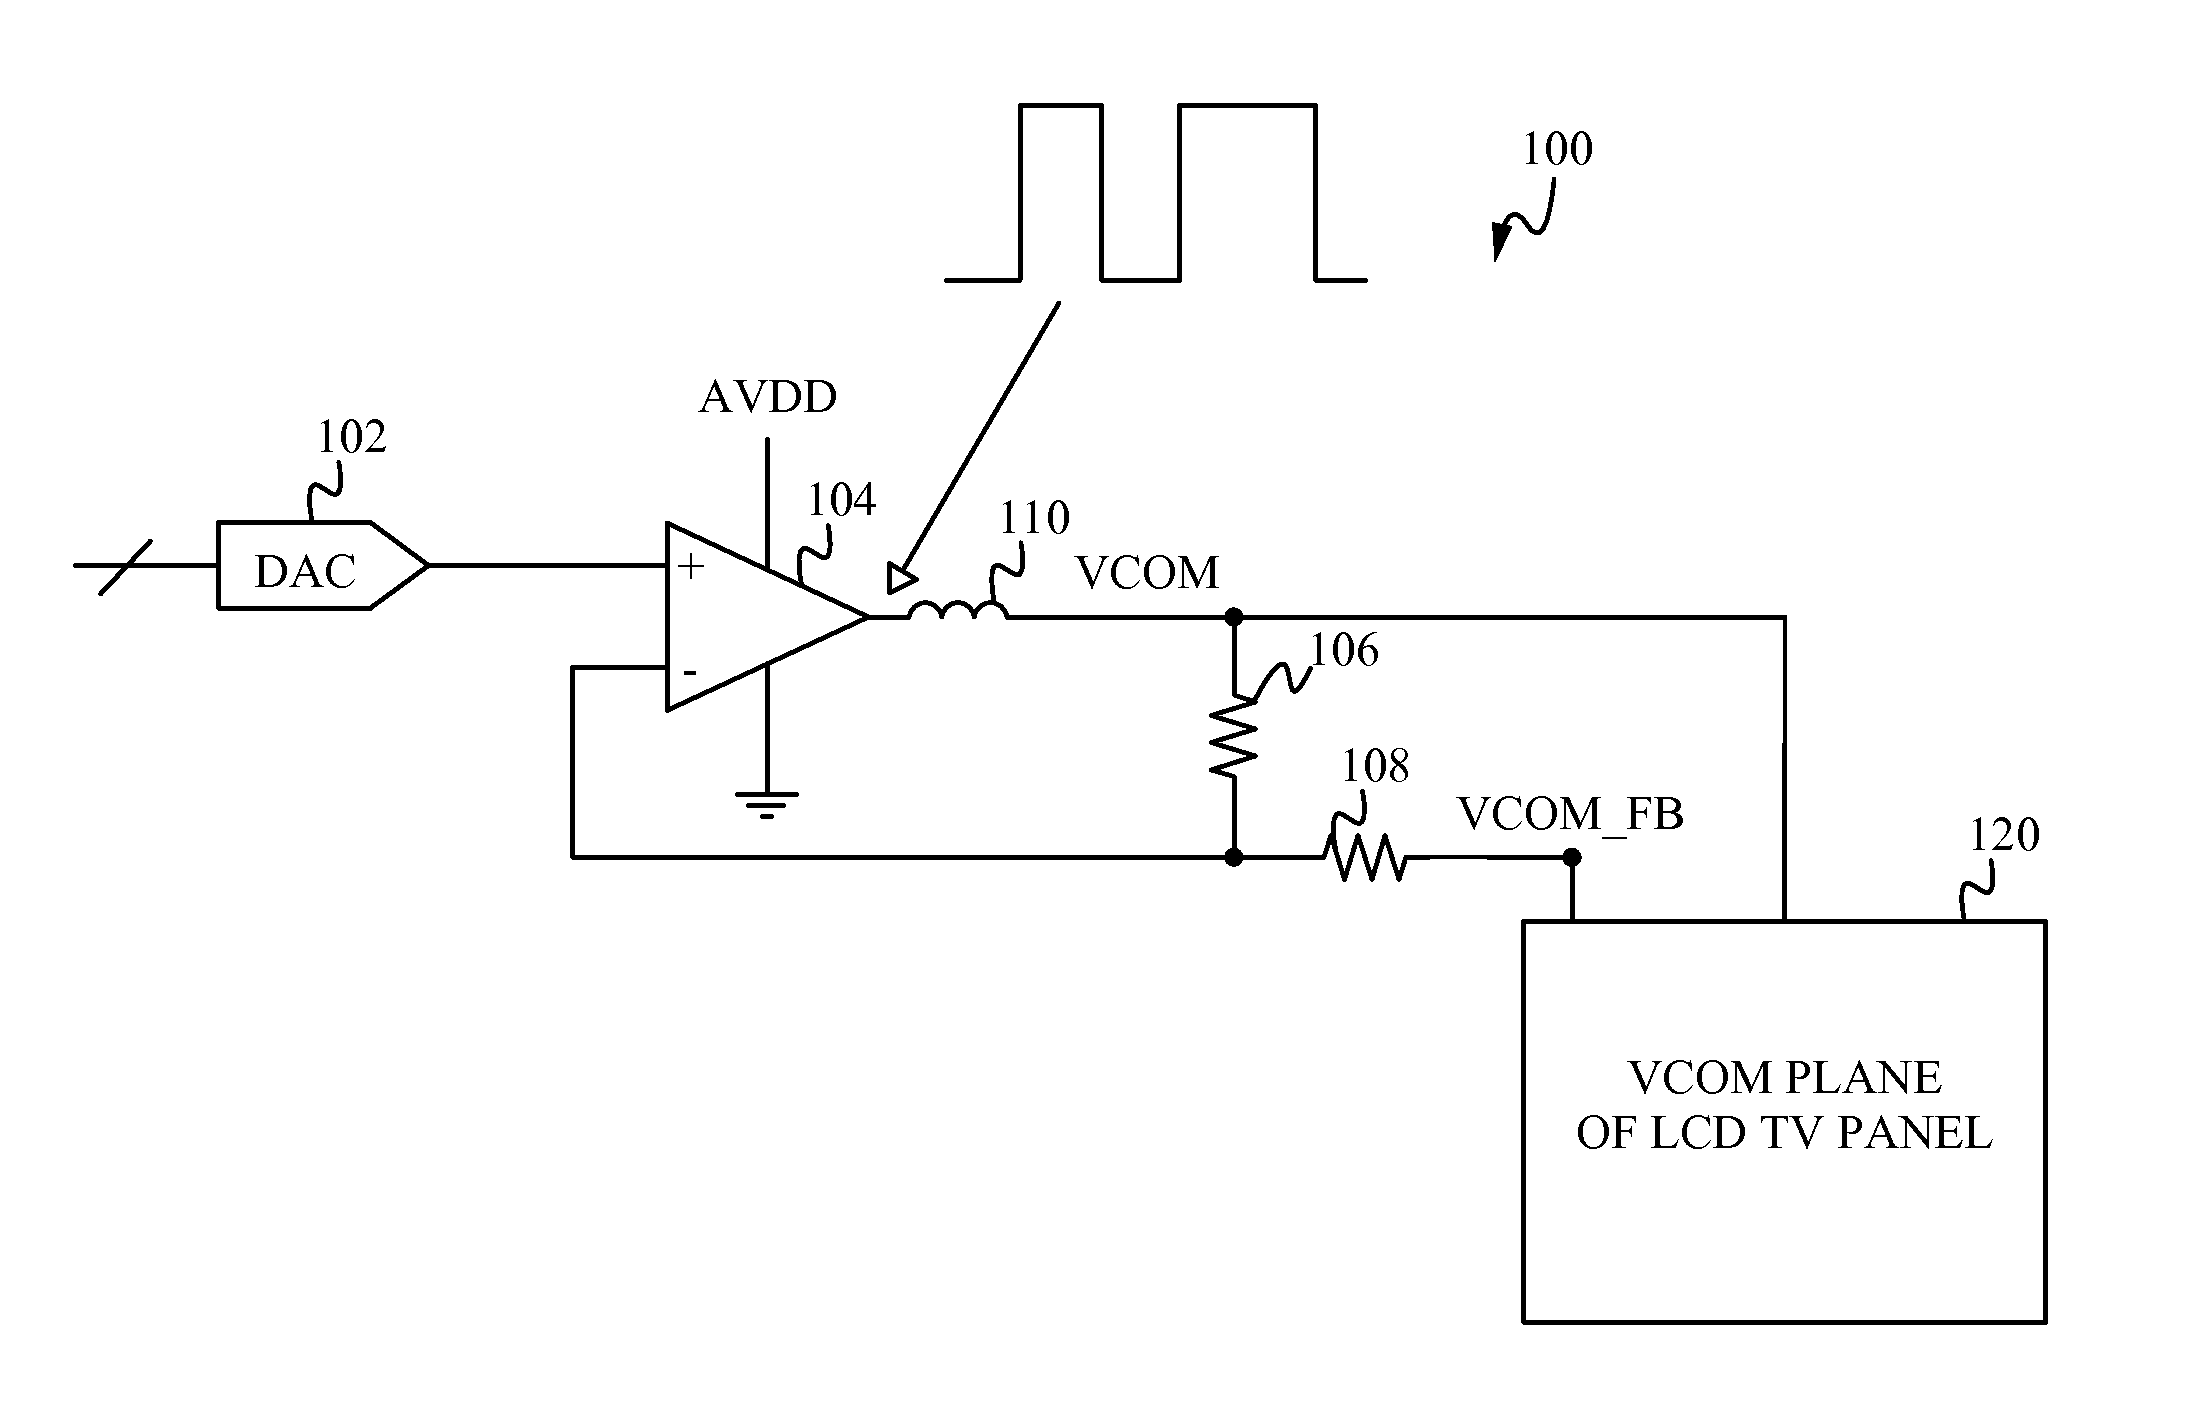 VCOM amplifier with fast-switching gain